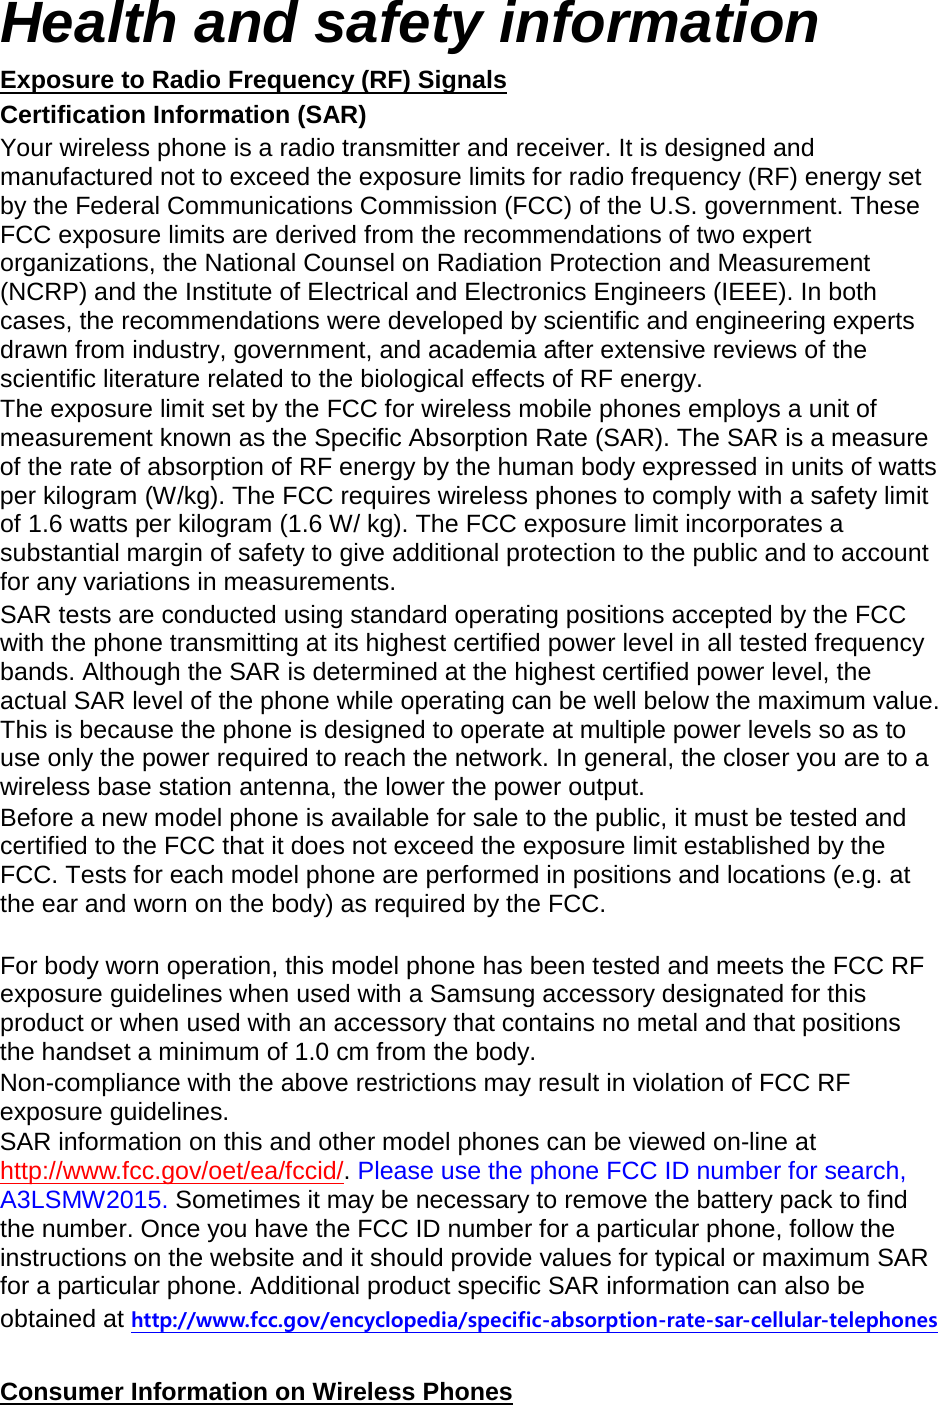 Health and safety information Exposure to Radio Frequency (RF) Signals Certification Information (SAR) Your wireless phone is a radio transmitter and receiver. It is designed and manufactured not to exceed the exposure limits for radio frequency (RF) energy set by the Federal Communications Commission (FCC) of the U.S. government. These FCC exposure limits are derived from the recommendations of two expert organizations, the National Counsel on Radiation Protection and Measurement (NCRP) and the Institute of Electrical and Electronics Engineers (IEEE). In both cases, the recommendations were developed by scientific and engineering experts drawn from industry, government, and academia after extensive reviews of the scientific literature related to the biological effects of RF energy. The exposure limit set by the FCC for wireless mobile phones employs a unit of measurement known as the Specific Absorption Rate (SAR). The SAR is a measure of the rate of absorption of RF energy by the human body expressed in units of watts per kilogram (W/kg). The FCC requires wireless phones to comply with a safety limit of 1.6 watts per kilogram (1.6 W/ kg). The FCC exposure limit incorporates a substantial margin of safety to give additional protection to the public and to account for any variations in measurements. SAR tests are conducted using standard operating positions accepted by the FCC with the phone transmitting at its highest certified power level in all tested frequency bands. Although the SAR is determined at the highest certified power level, the actual SAR level of the phone while operating can be well below the maximum value. This is because the phone is designed to operate at multiple power levels so as to use only the power required to reach the network. In general, the closer you are to a wireless base station antenna, the lower the power output. Before a new model phone is available for sale to the public, it must be tested and certified to the FCC that it does not exceed the exposure limit established by the FCC. Tests for each model phone are performed in positions and locations (e.g. at the ear and worn on the body) as required by the FCC.      For body worn operation, this model phone has been tested and meets the FCC RF exposure guidelines when used with a Samsung accessory designated for this product or when used with an accessory that contains no metal and that positions the handset a minimum of 1.0 cm from the body.   Non-compliance with the above restrictions may result in violation of FCC RF exposure guidelines. SAR information on this and other model phones can be viewed on-line at http://www.fcc.gov/oet/ea/fccid/. Please use the phone FCC ID number for search, A3LSMW2015. Sometimes it may be necessary to remove the battery pack to find the number. Once you have the FCC ID number for a particular phone, follow the instructions on the website and it should provide values for typical or maximum SAR for a particular phone. Additional product specific SAR information can also be obtained at http://www.fcc.gov/encyclopedia/specific-absorption-rate-sar-cellular-telephones  Consumer Information on Wireless Phones 